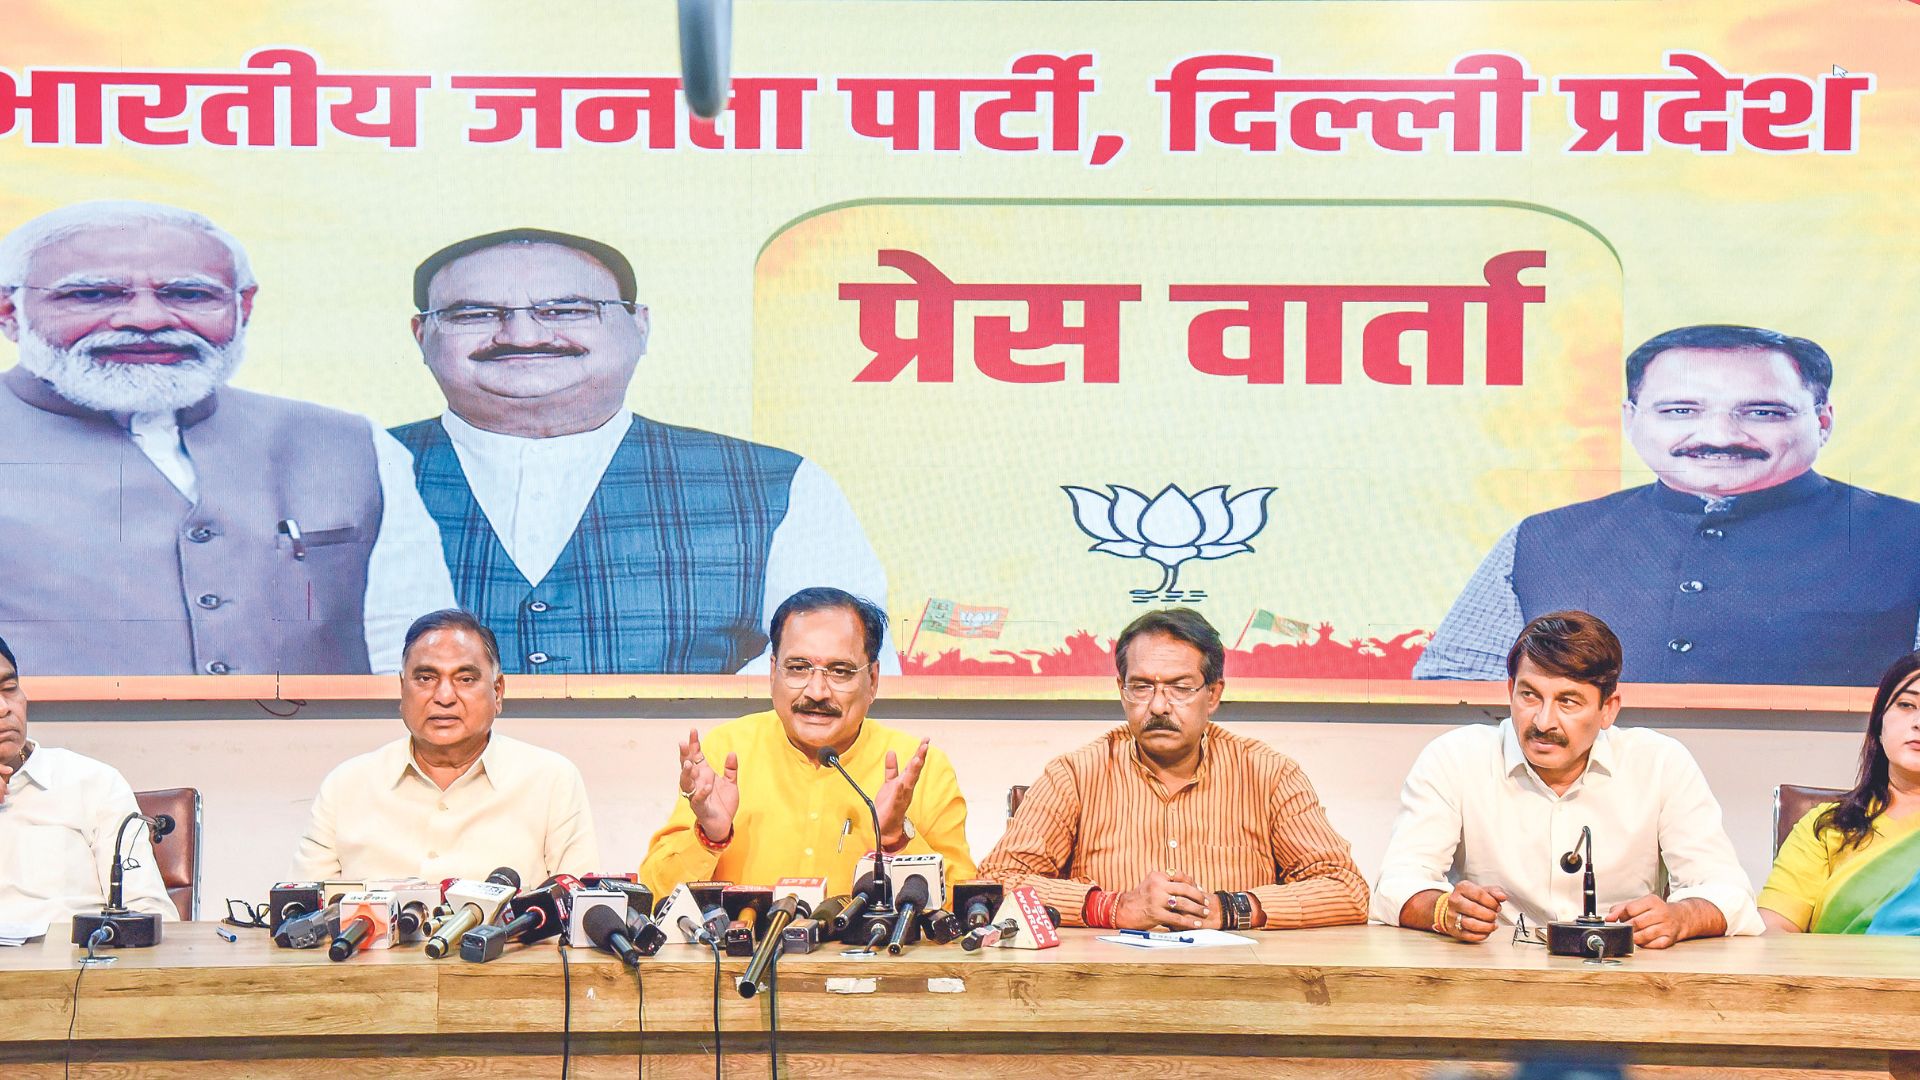 BJP accuses AAP govt of misleading citizens